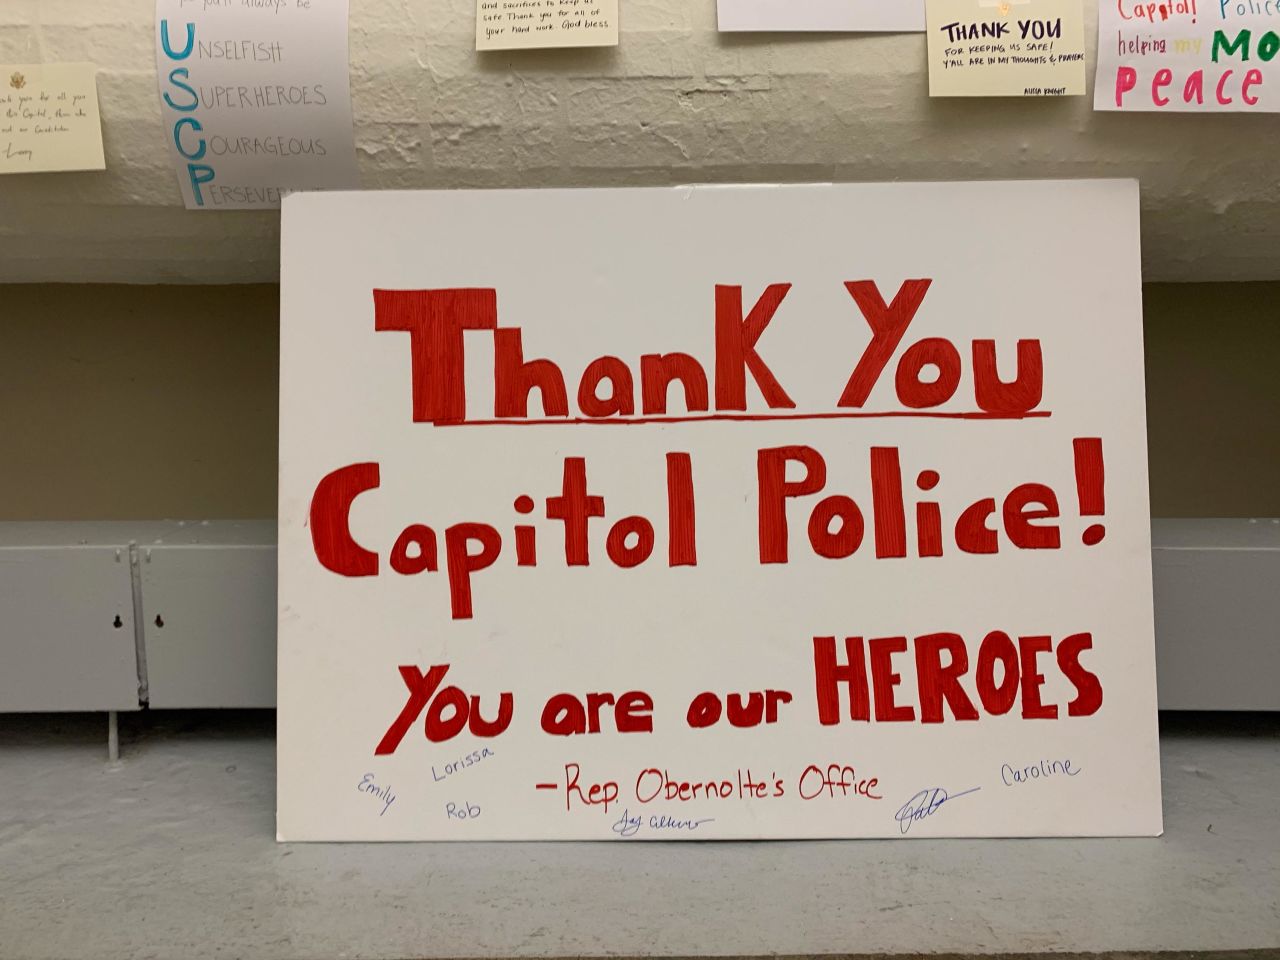 Several congressional offices and staffers write kind words for US Capitol Police Officers.